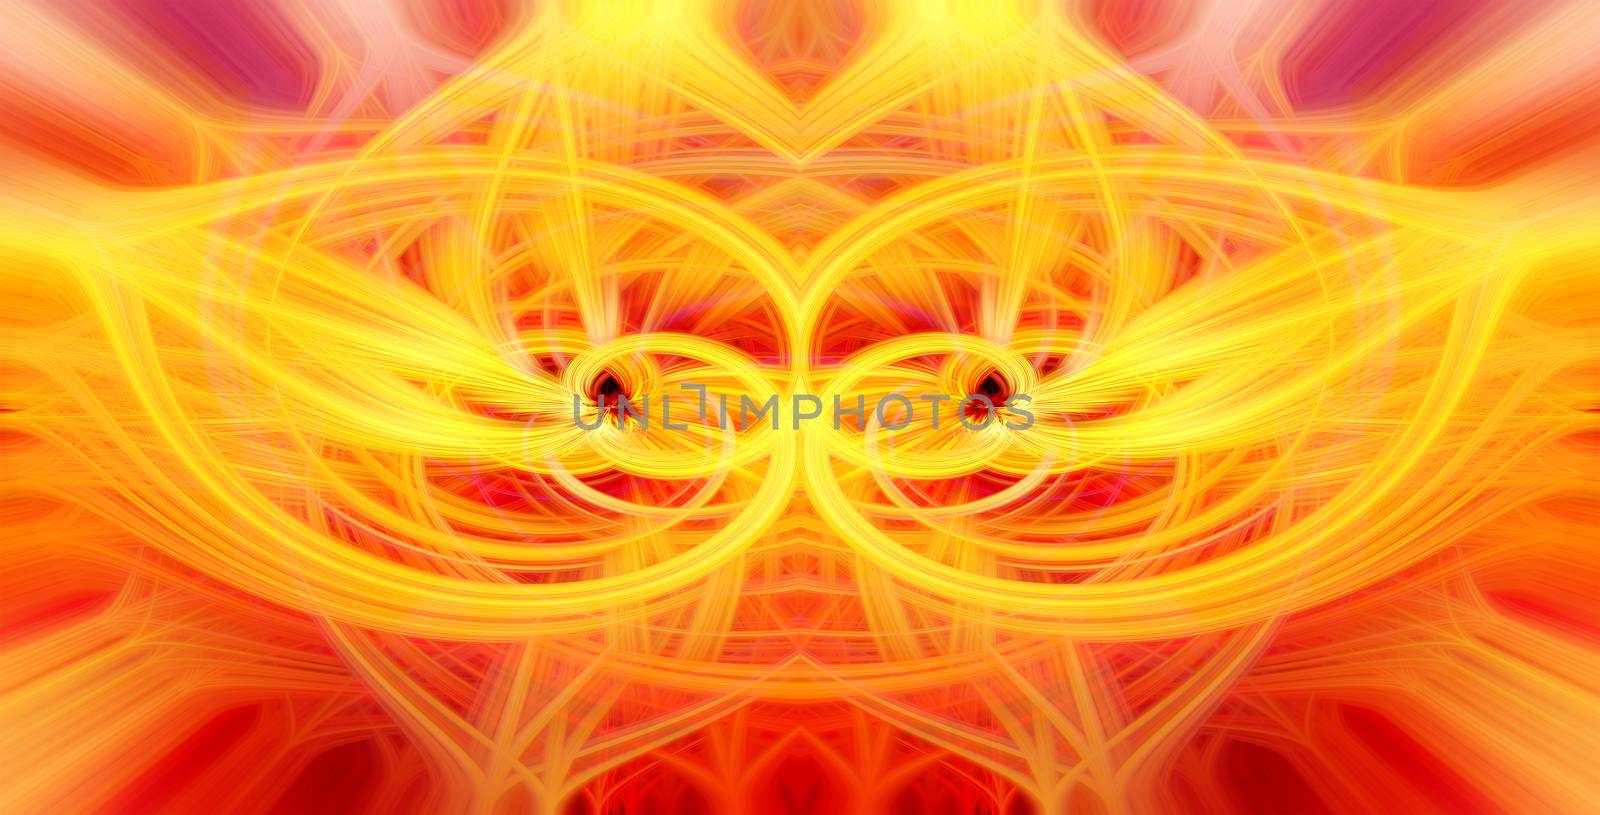 Beautiful abstract intertwined glowing 3d fibers forming a shape of sparkle, flame, flower, interlinked hearts. Yellow, orange, and red colors. Illustration by DamantisZ